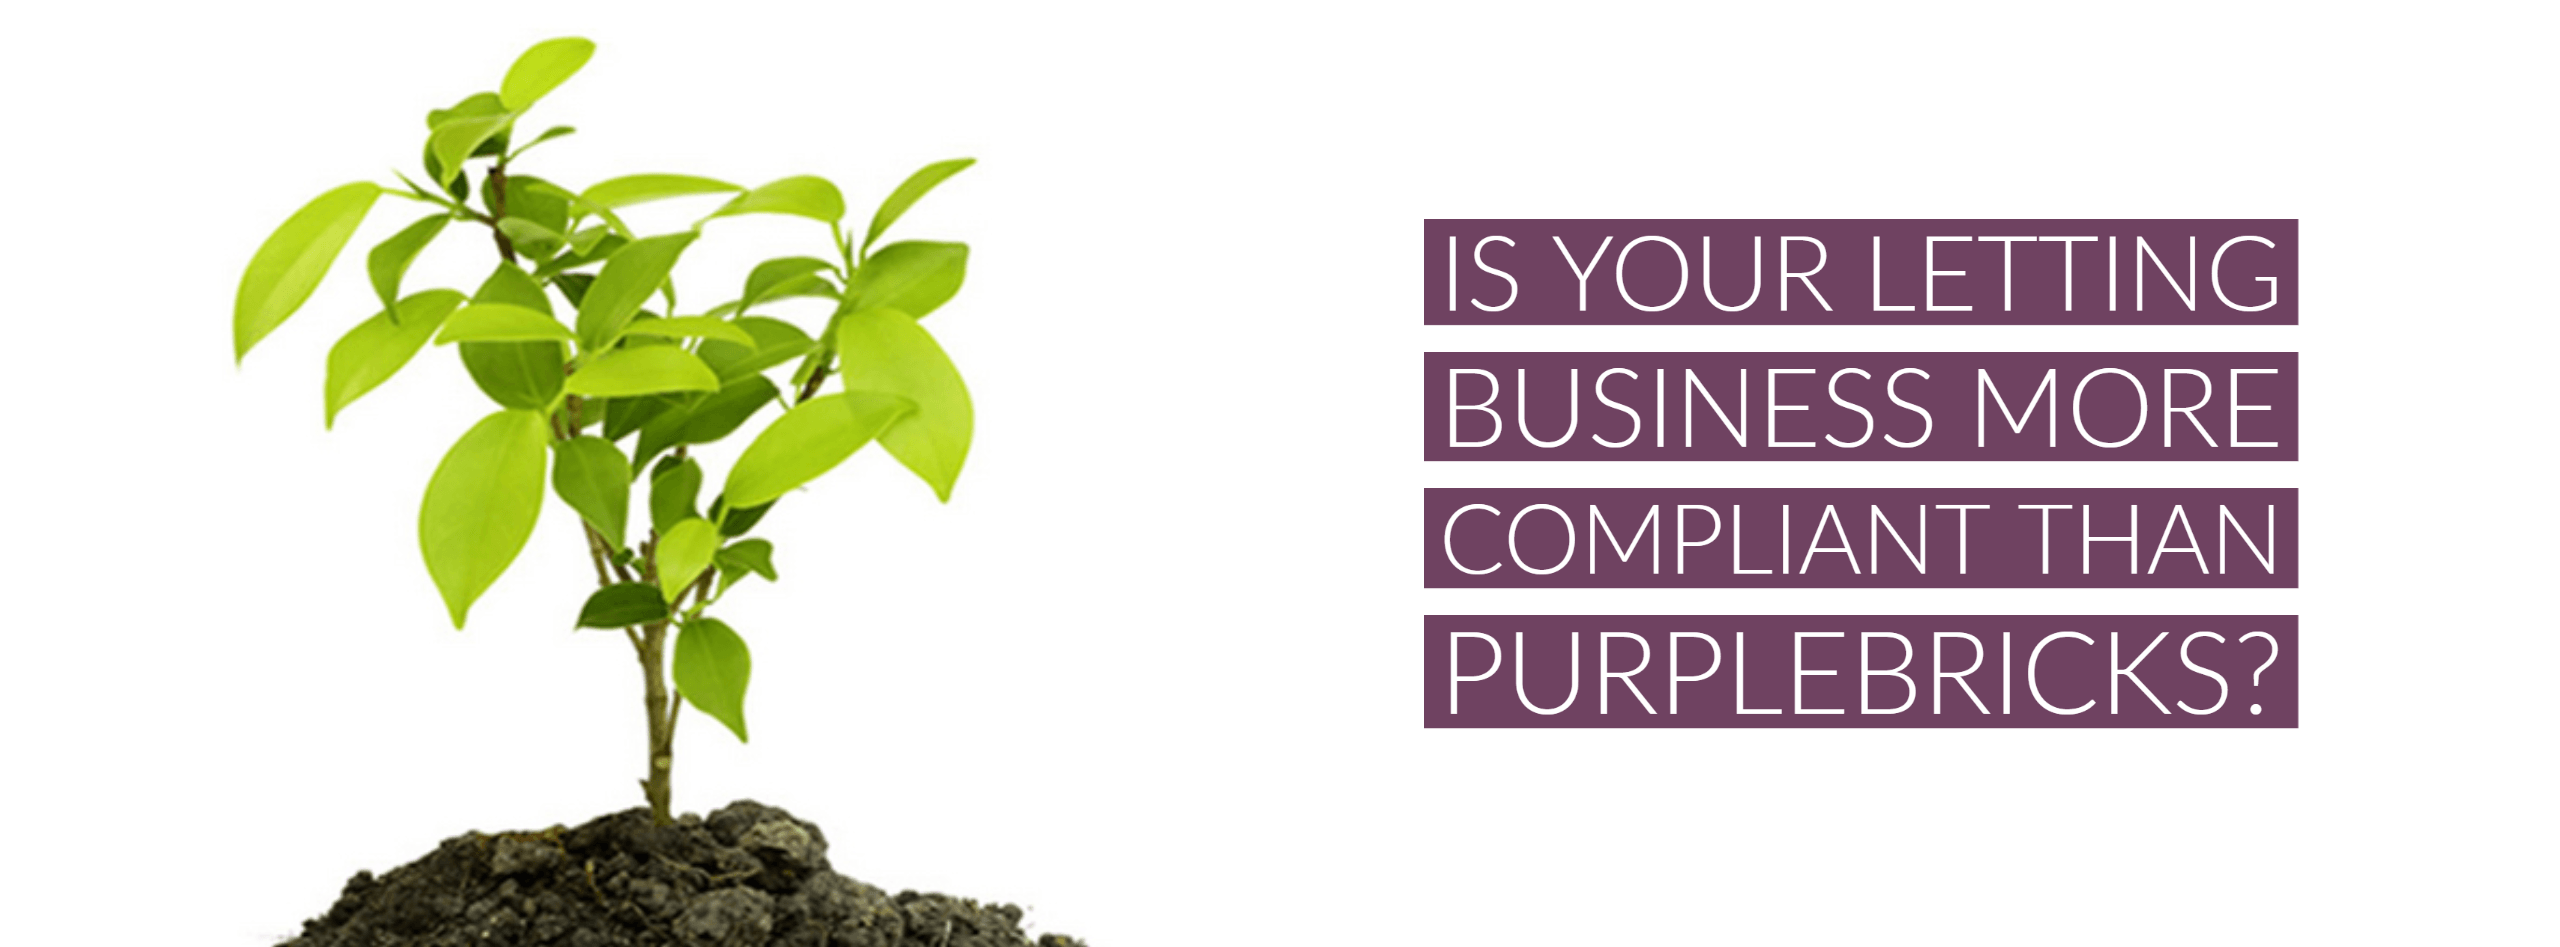 Is Your Letting Business More Compliant Than Purplebricks?